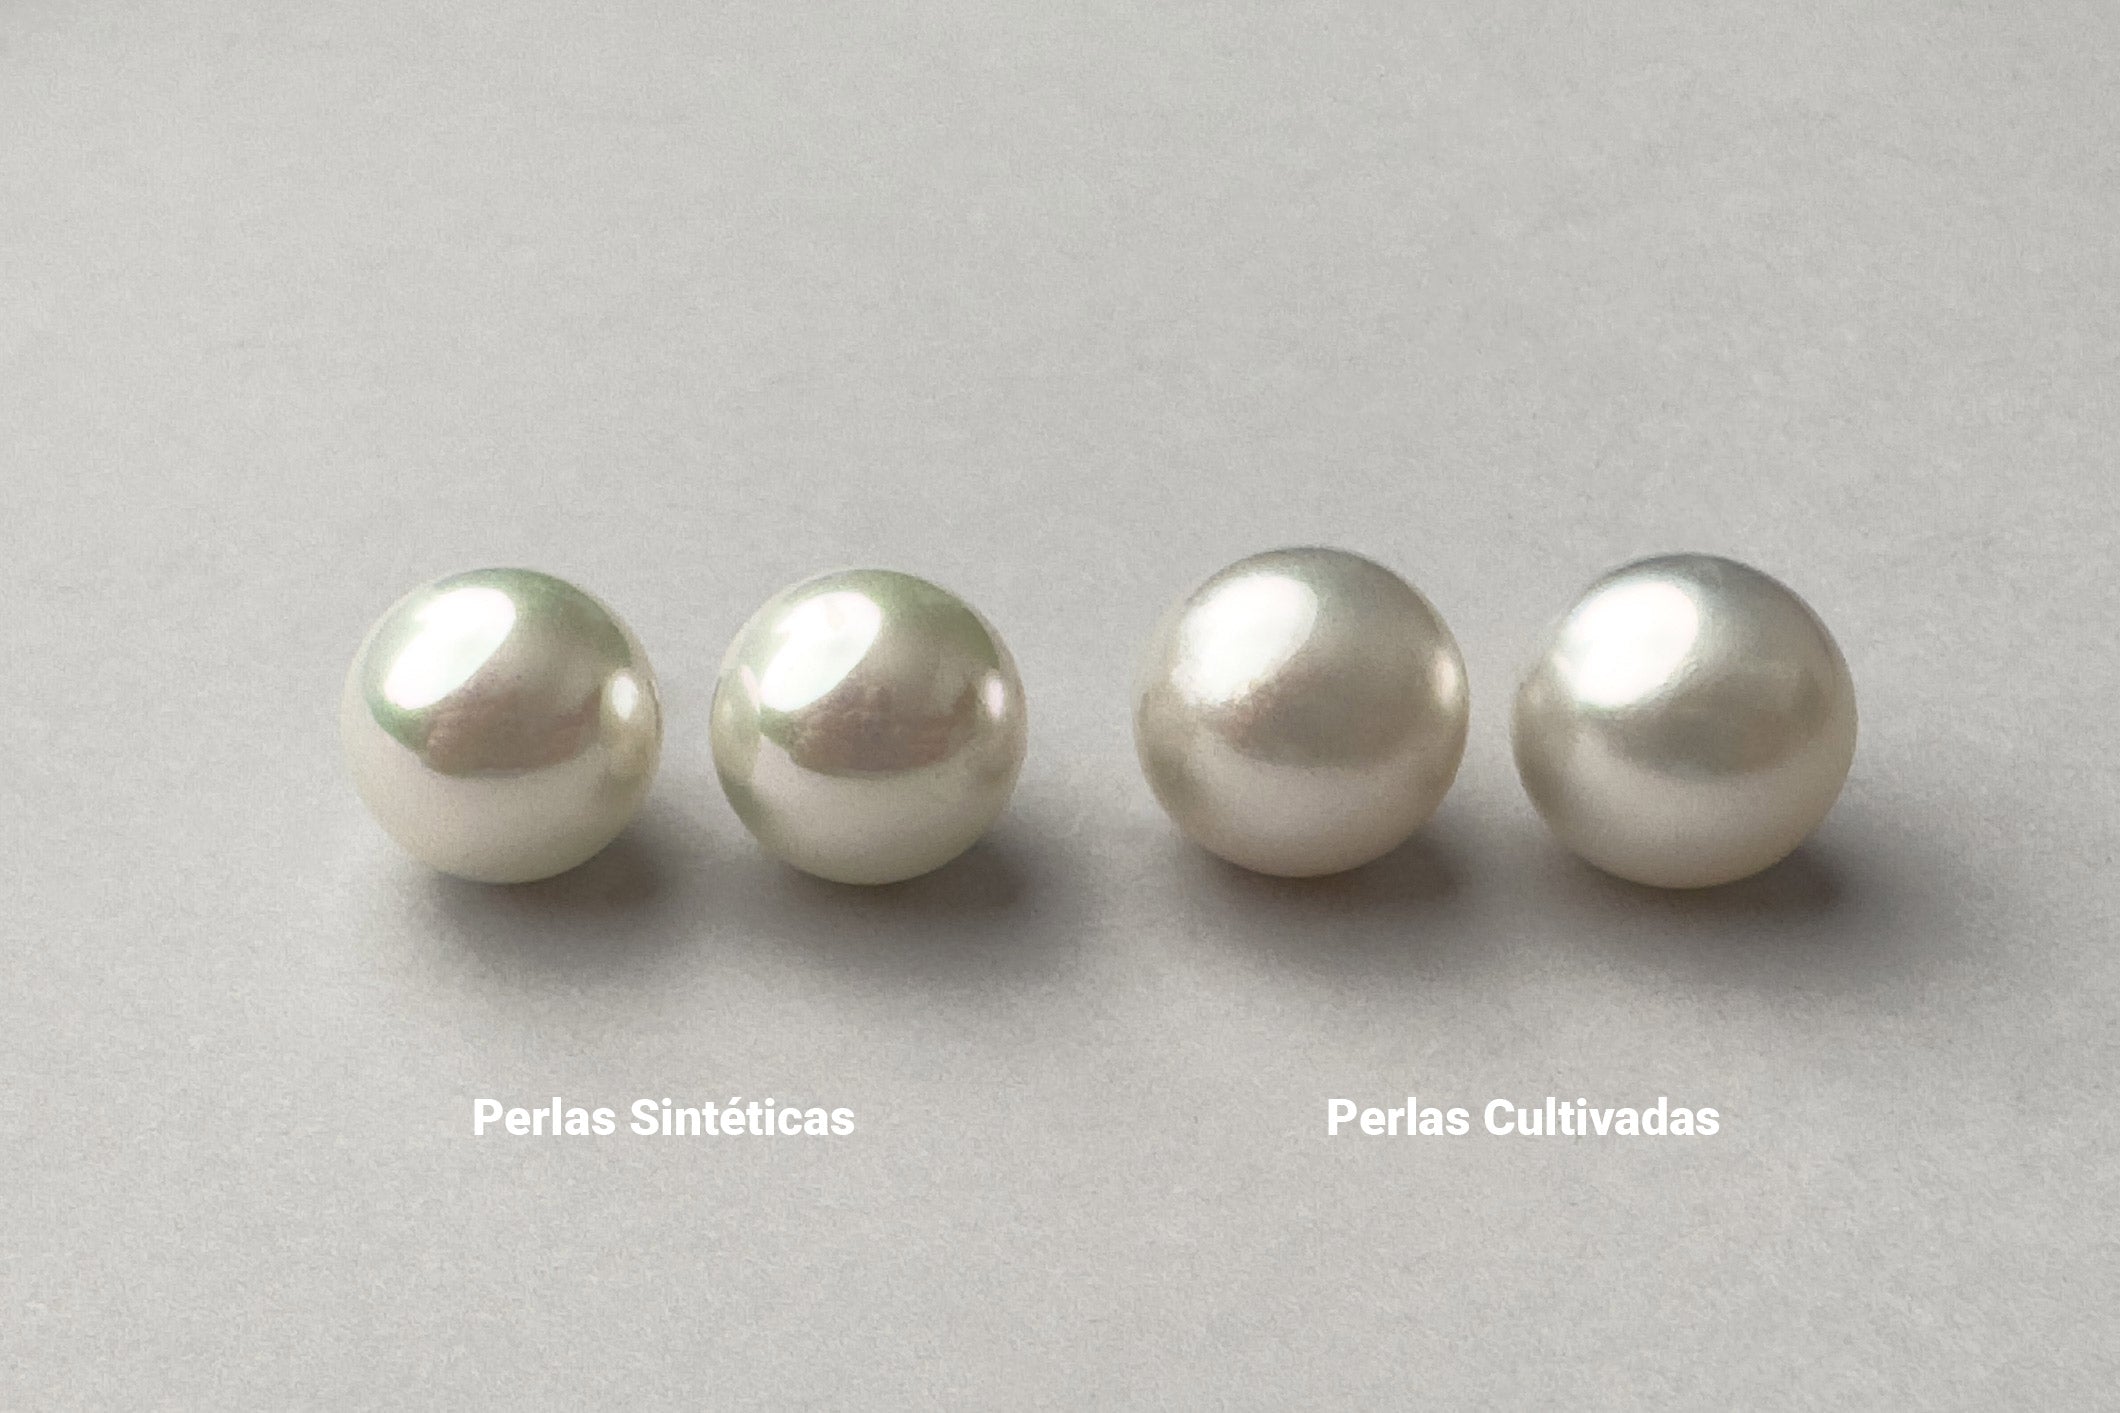 Comparison image between synthetic and cultured pearls